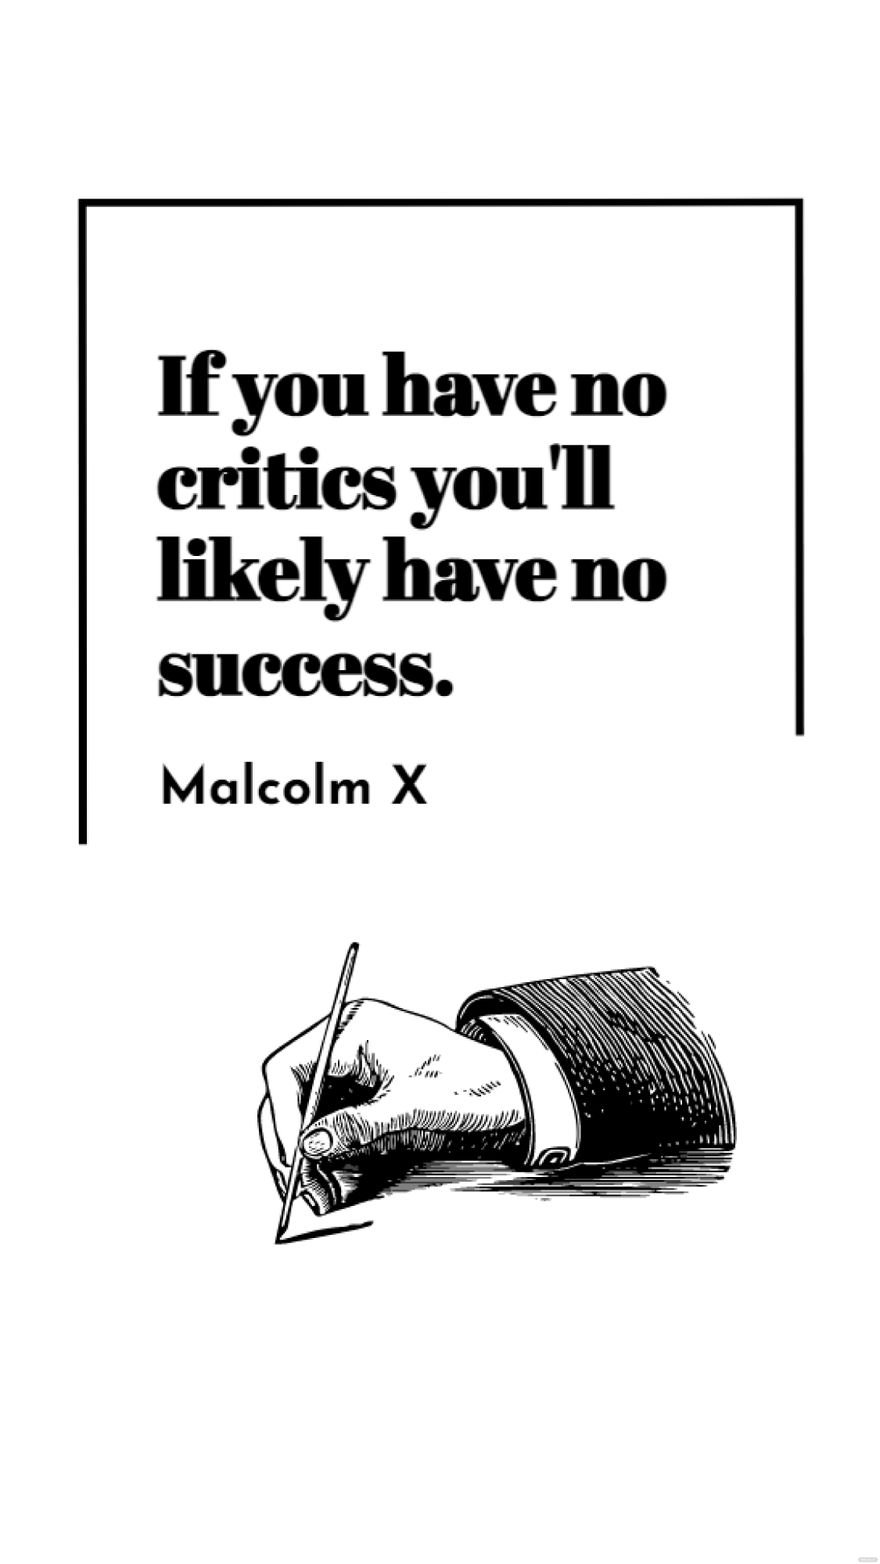 Malcolm X - If you have no critics you'll likely have no success. in JPG